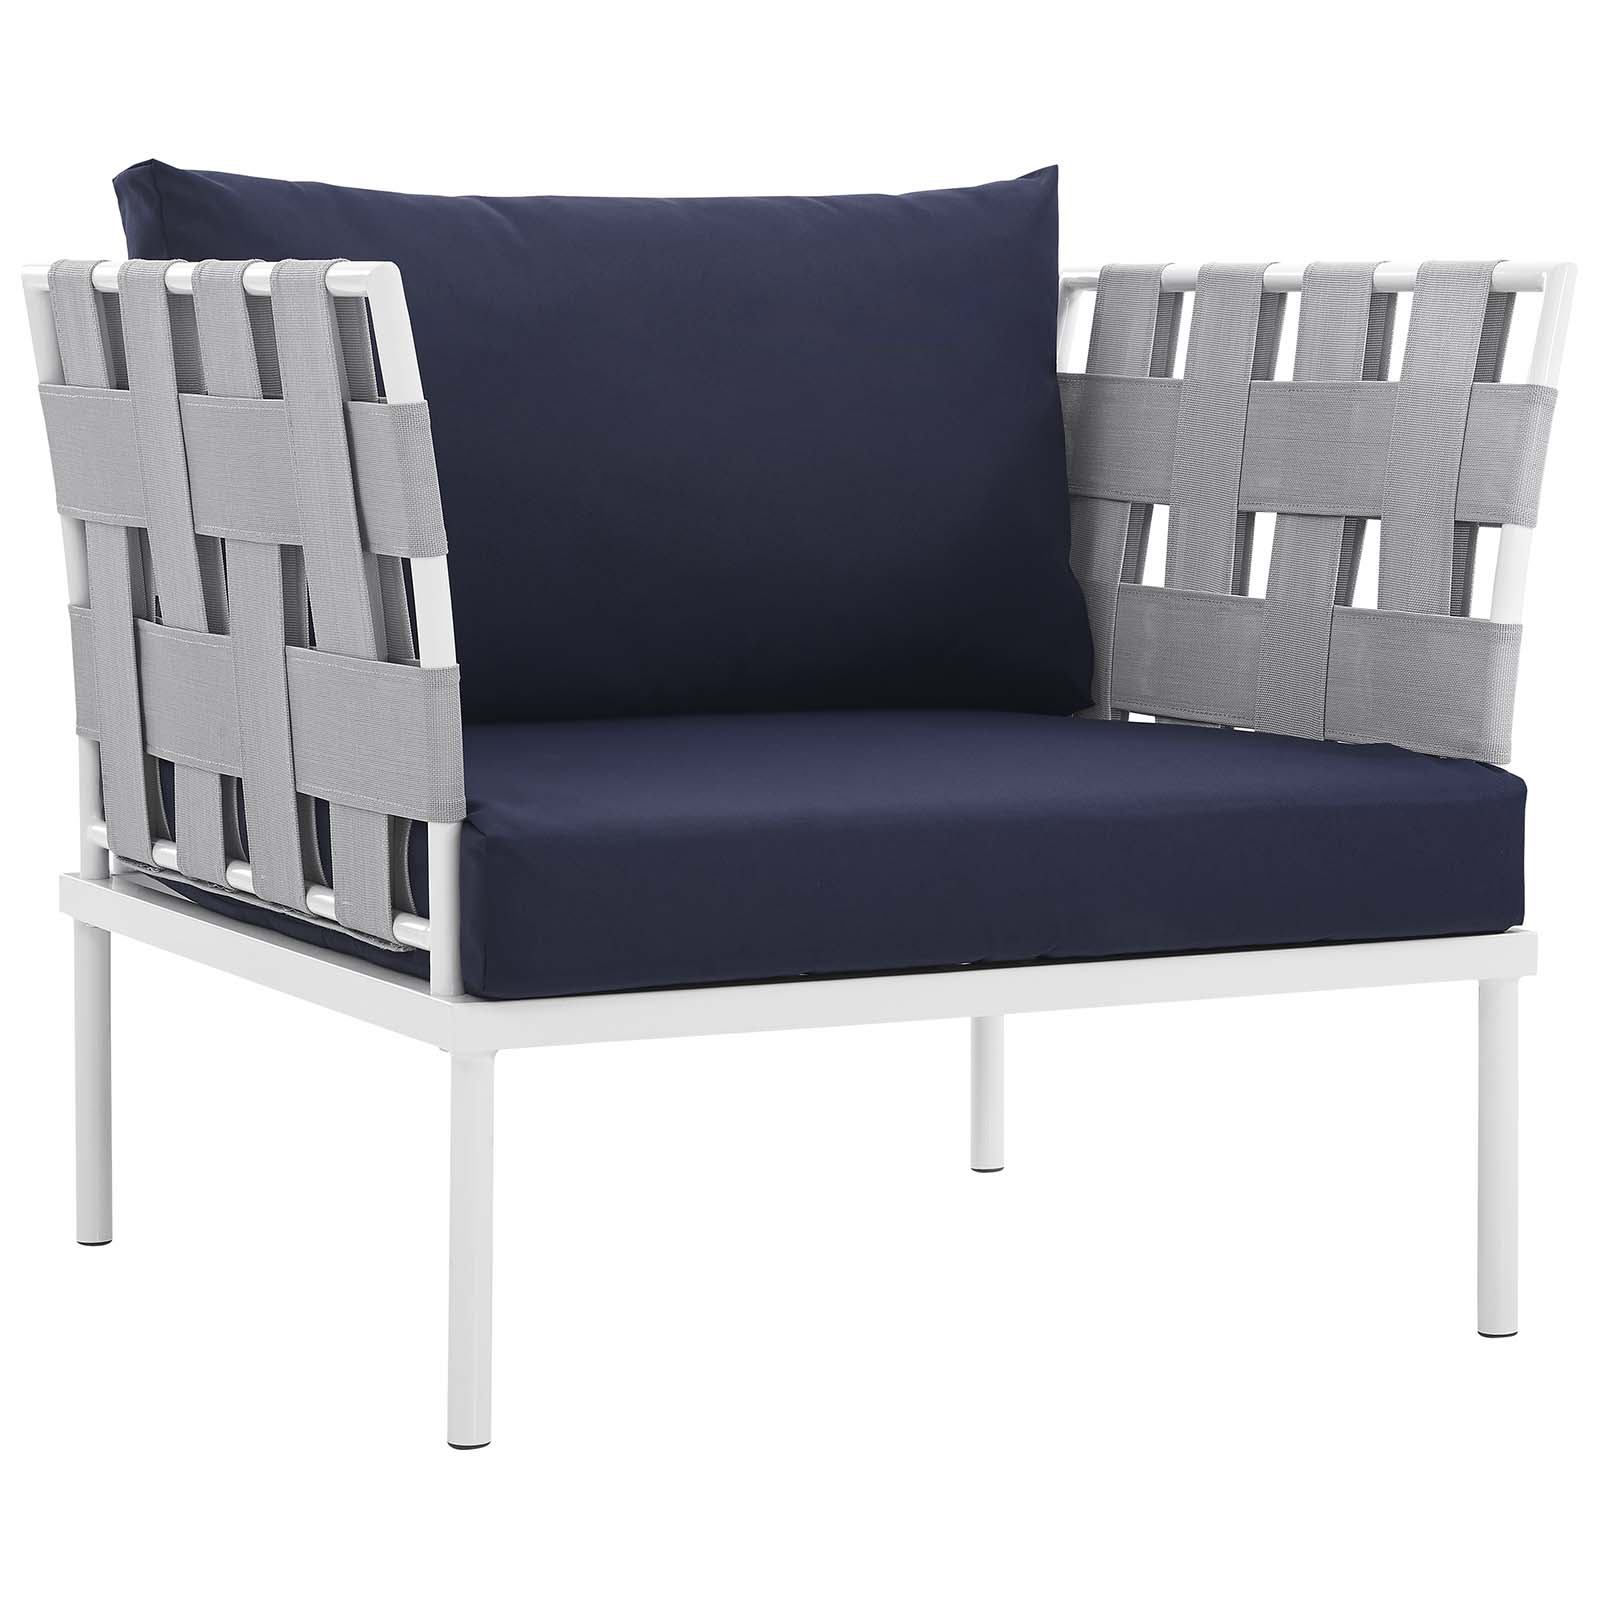 Modway Harmony 5 Piece Outdoor Patio Aluminum Sectional Sofa Set in White Navy - image 5 of 7